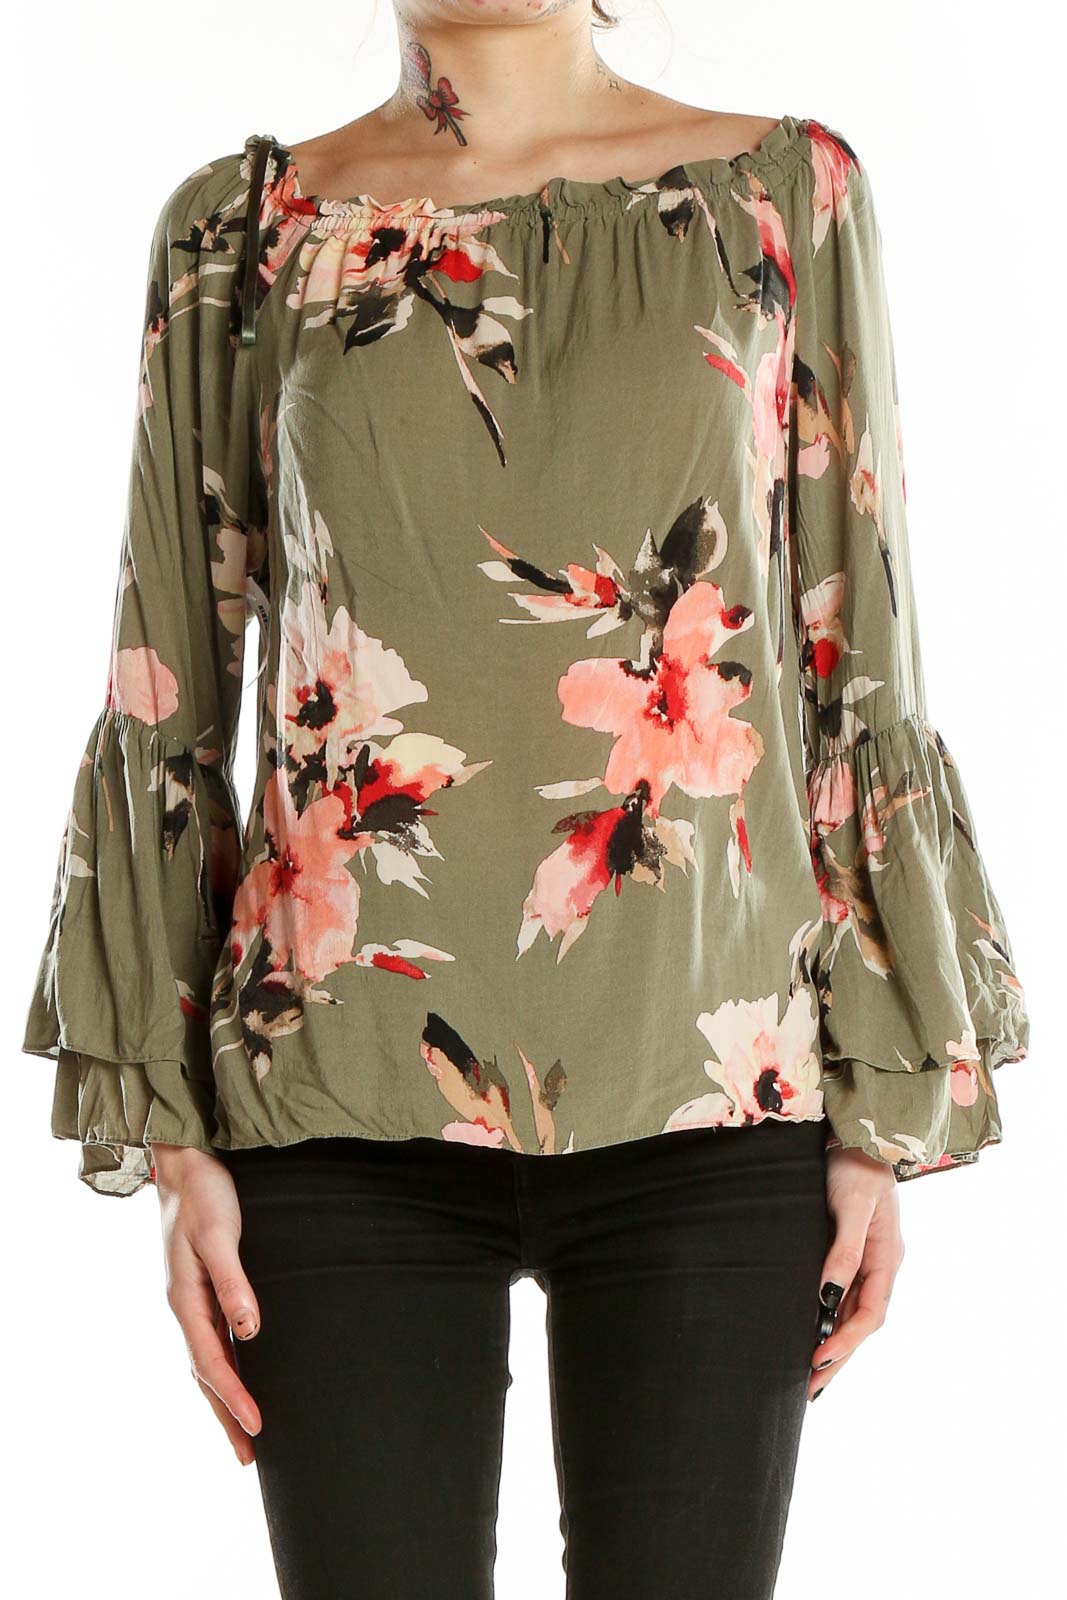 Green Floral Top Front